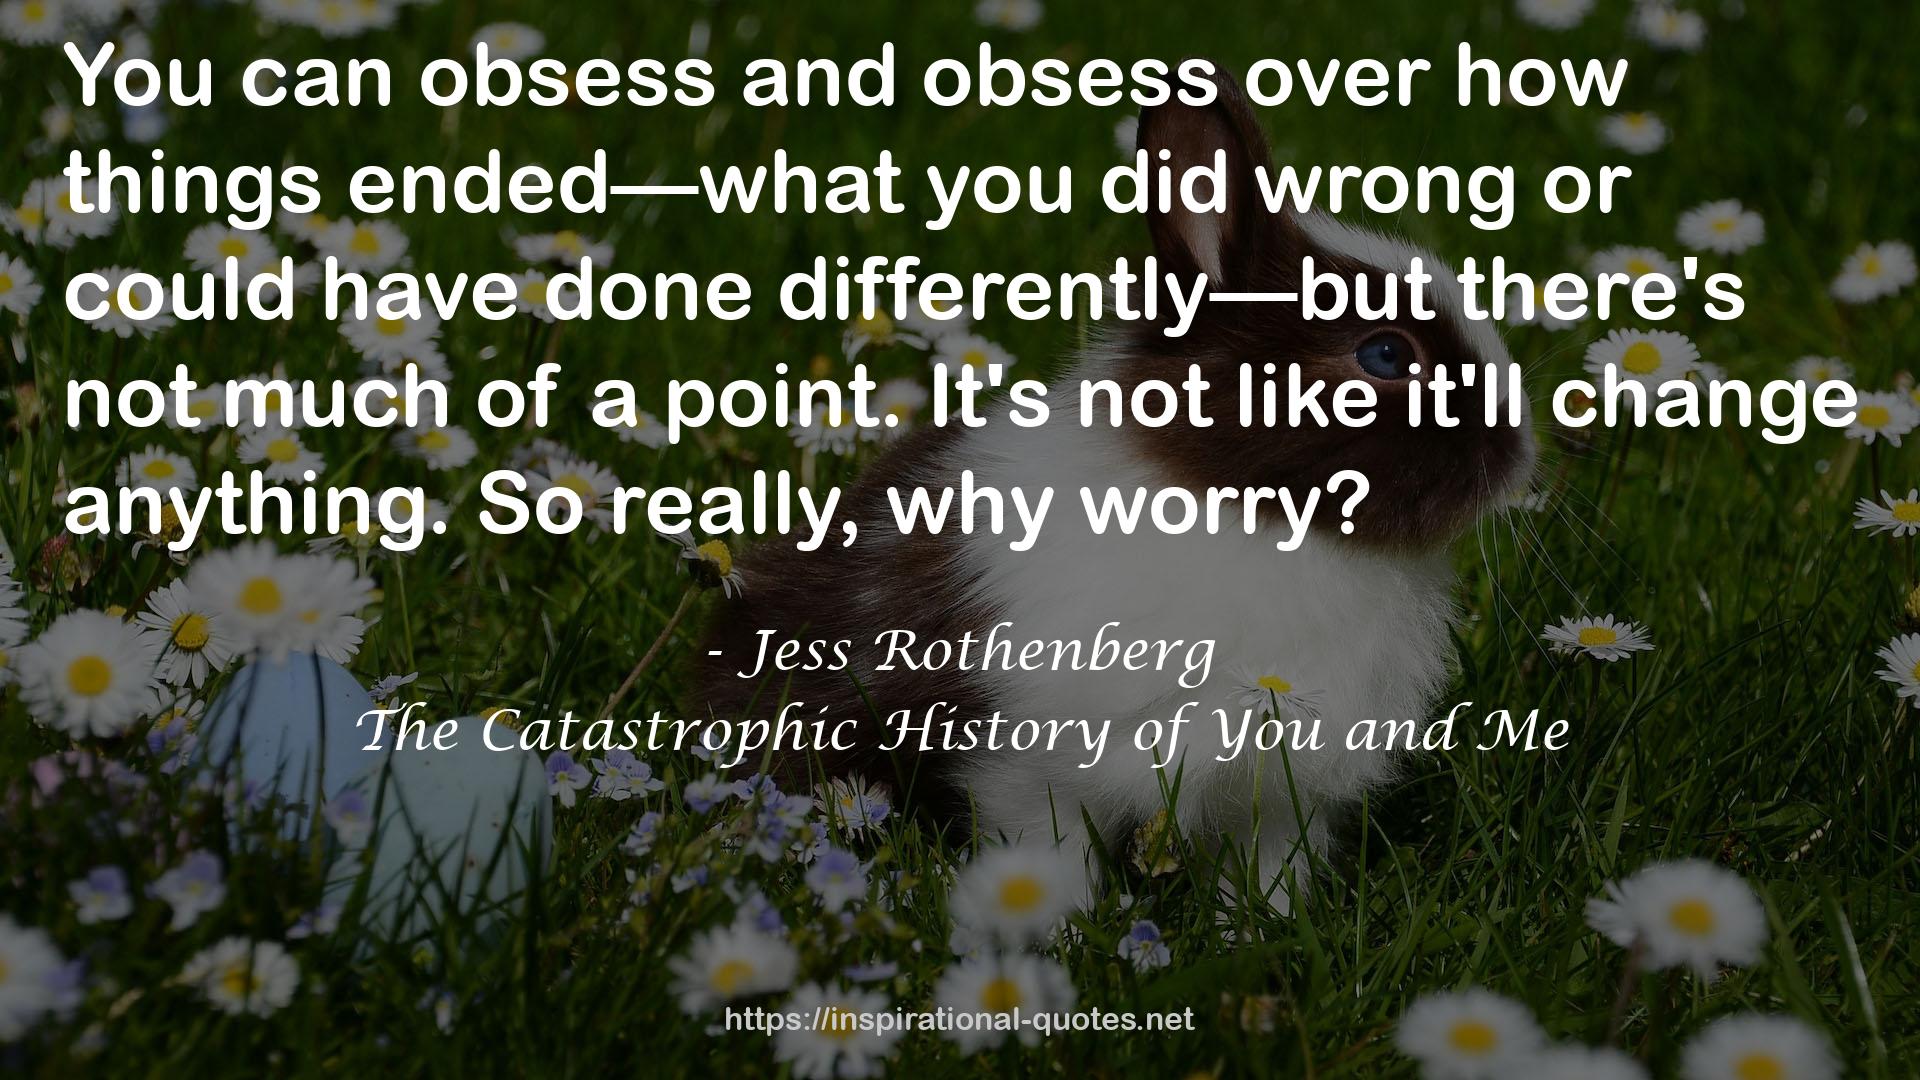 Jess Rothenberg QUOTES